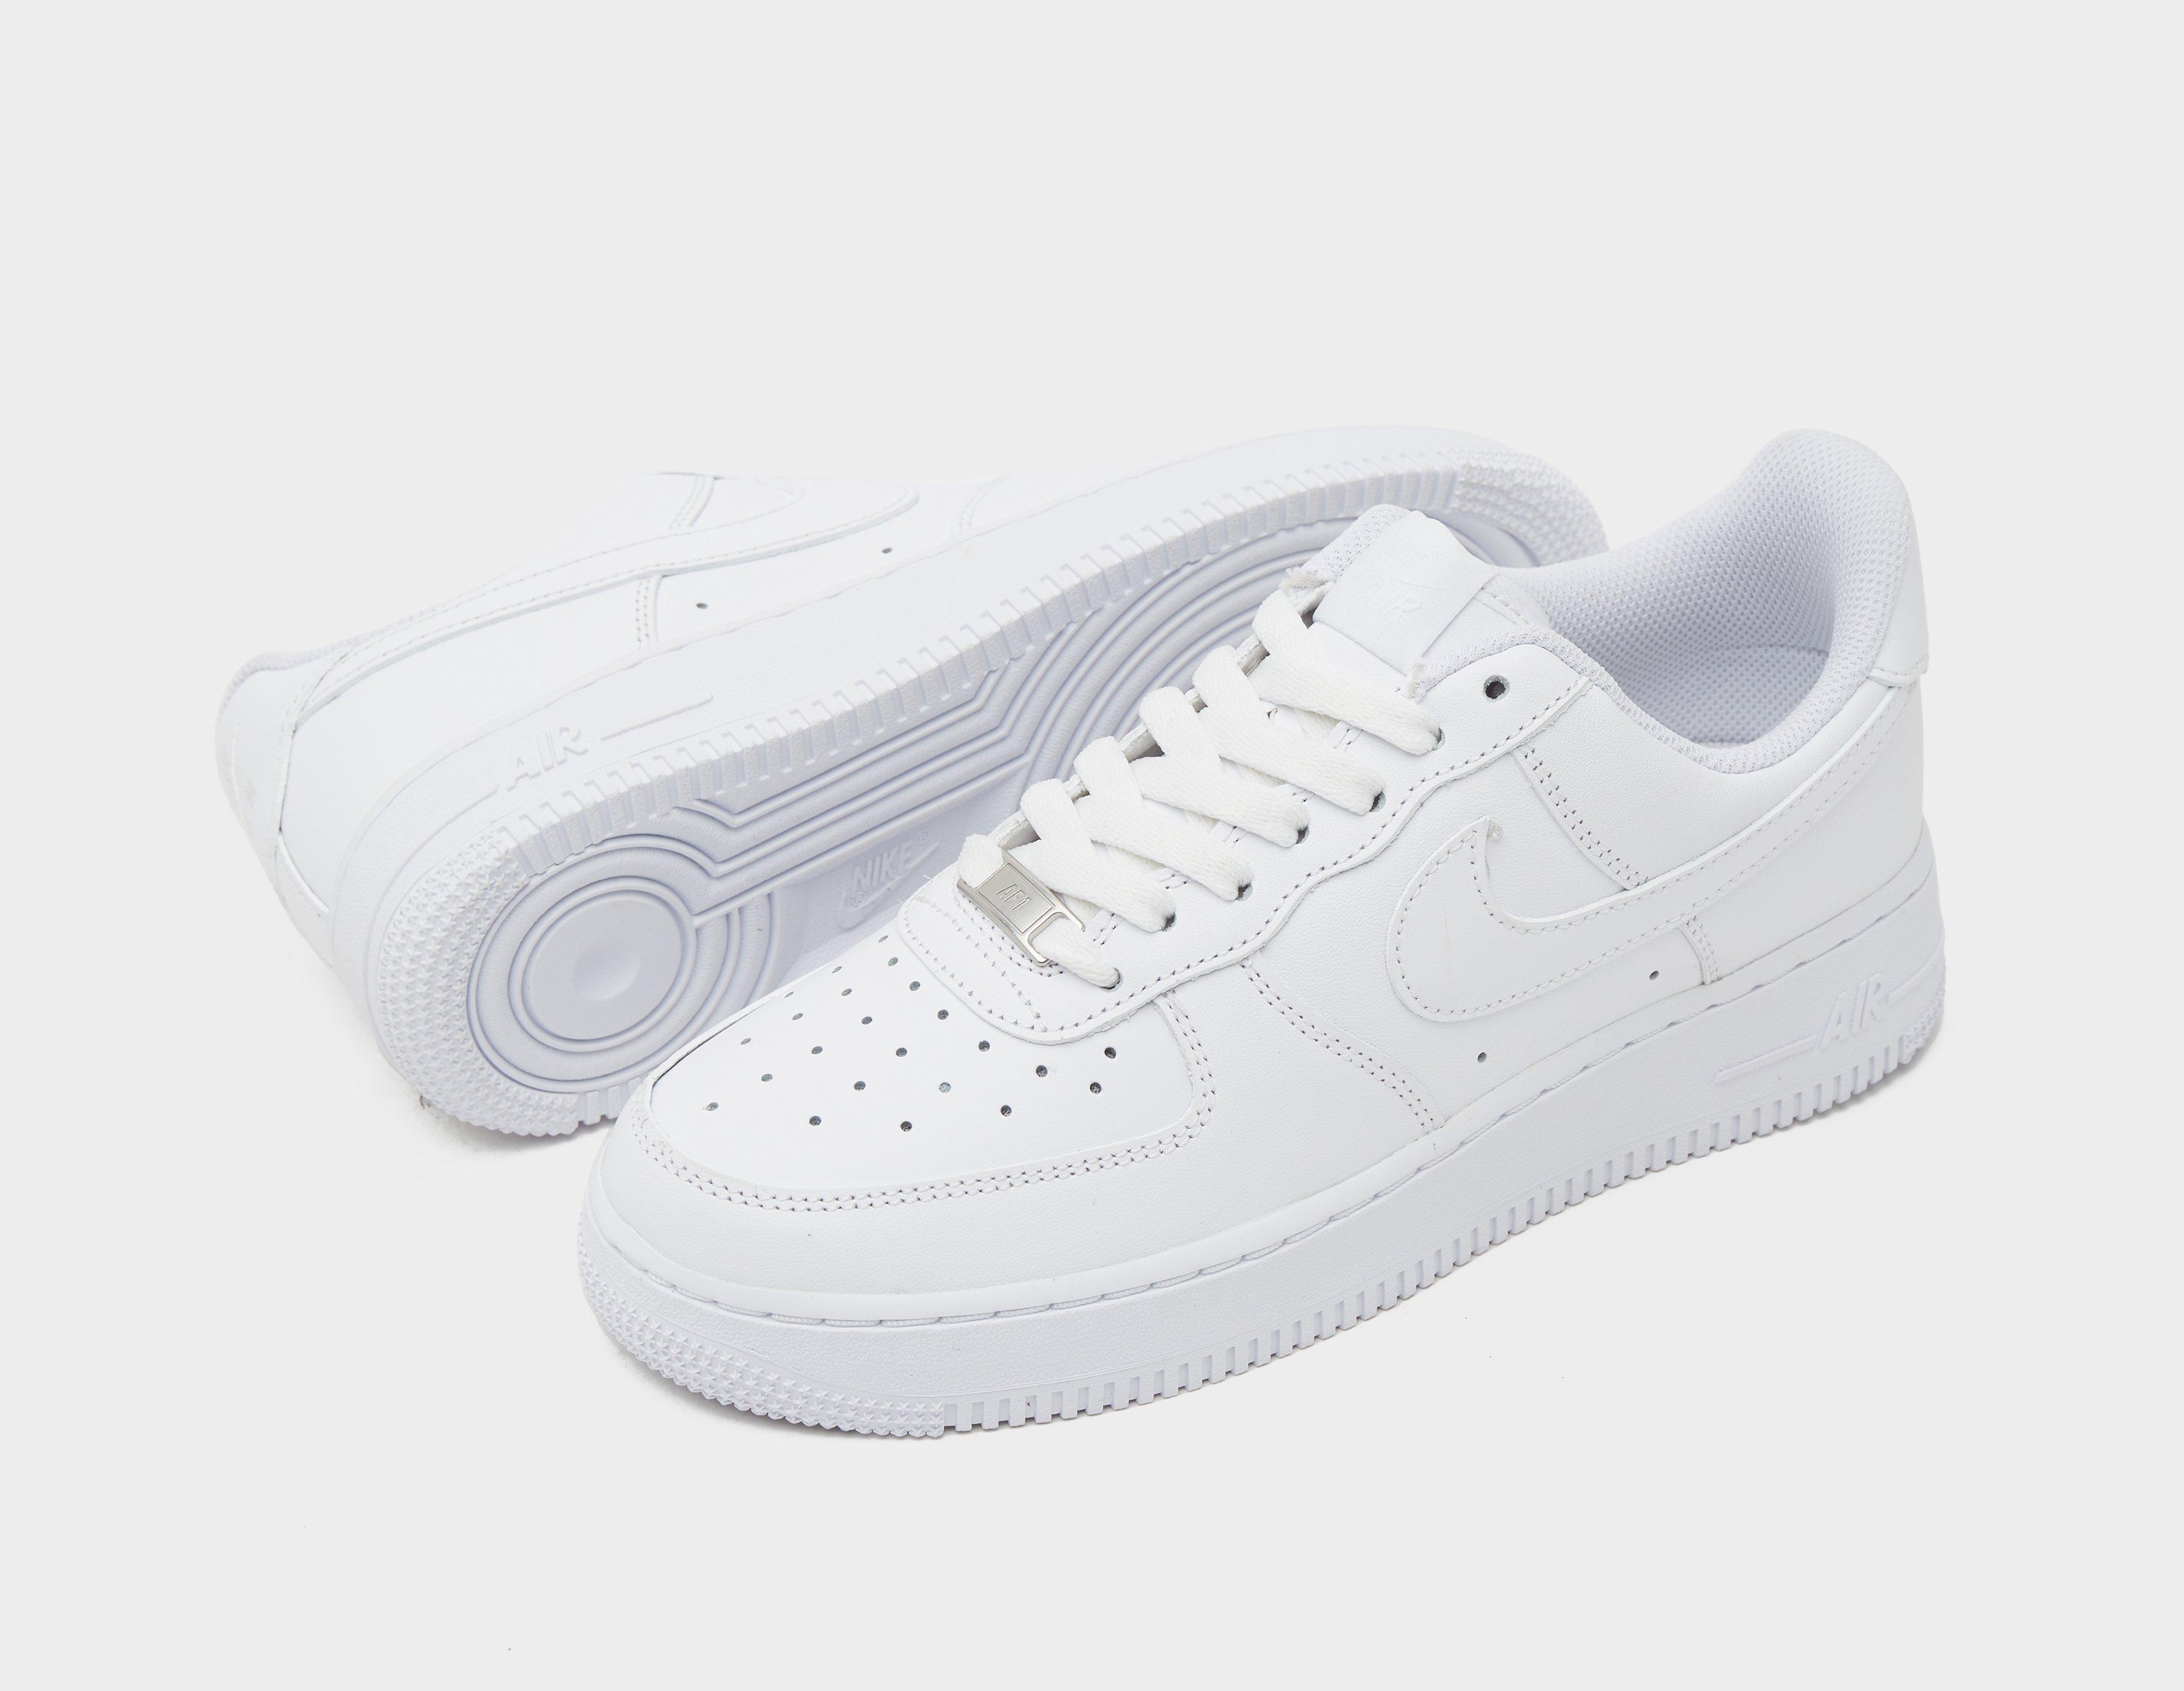 white nike air force 1 low